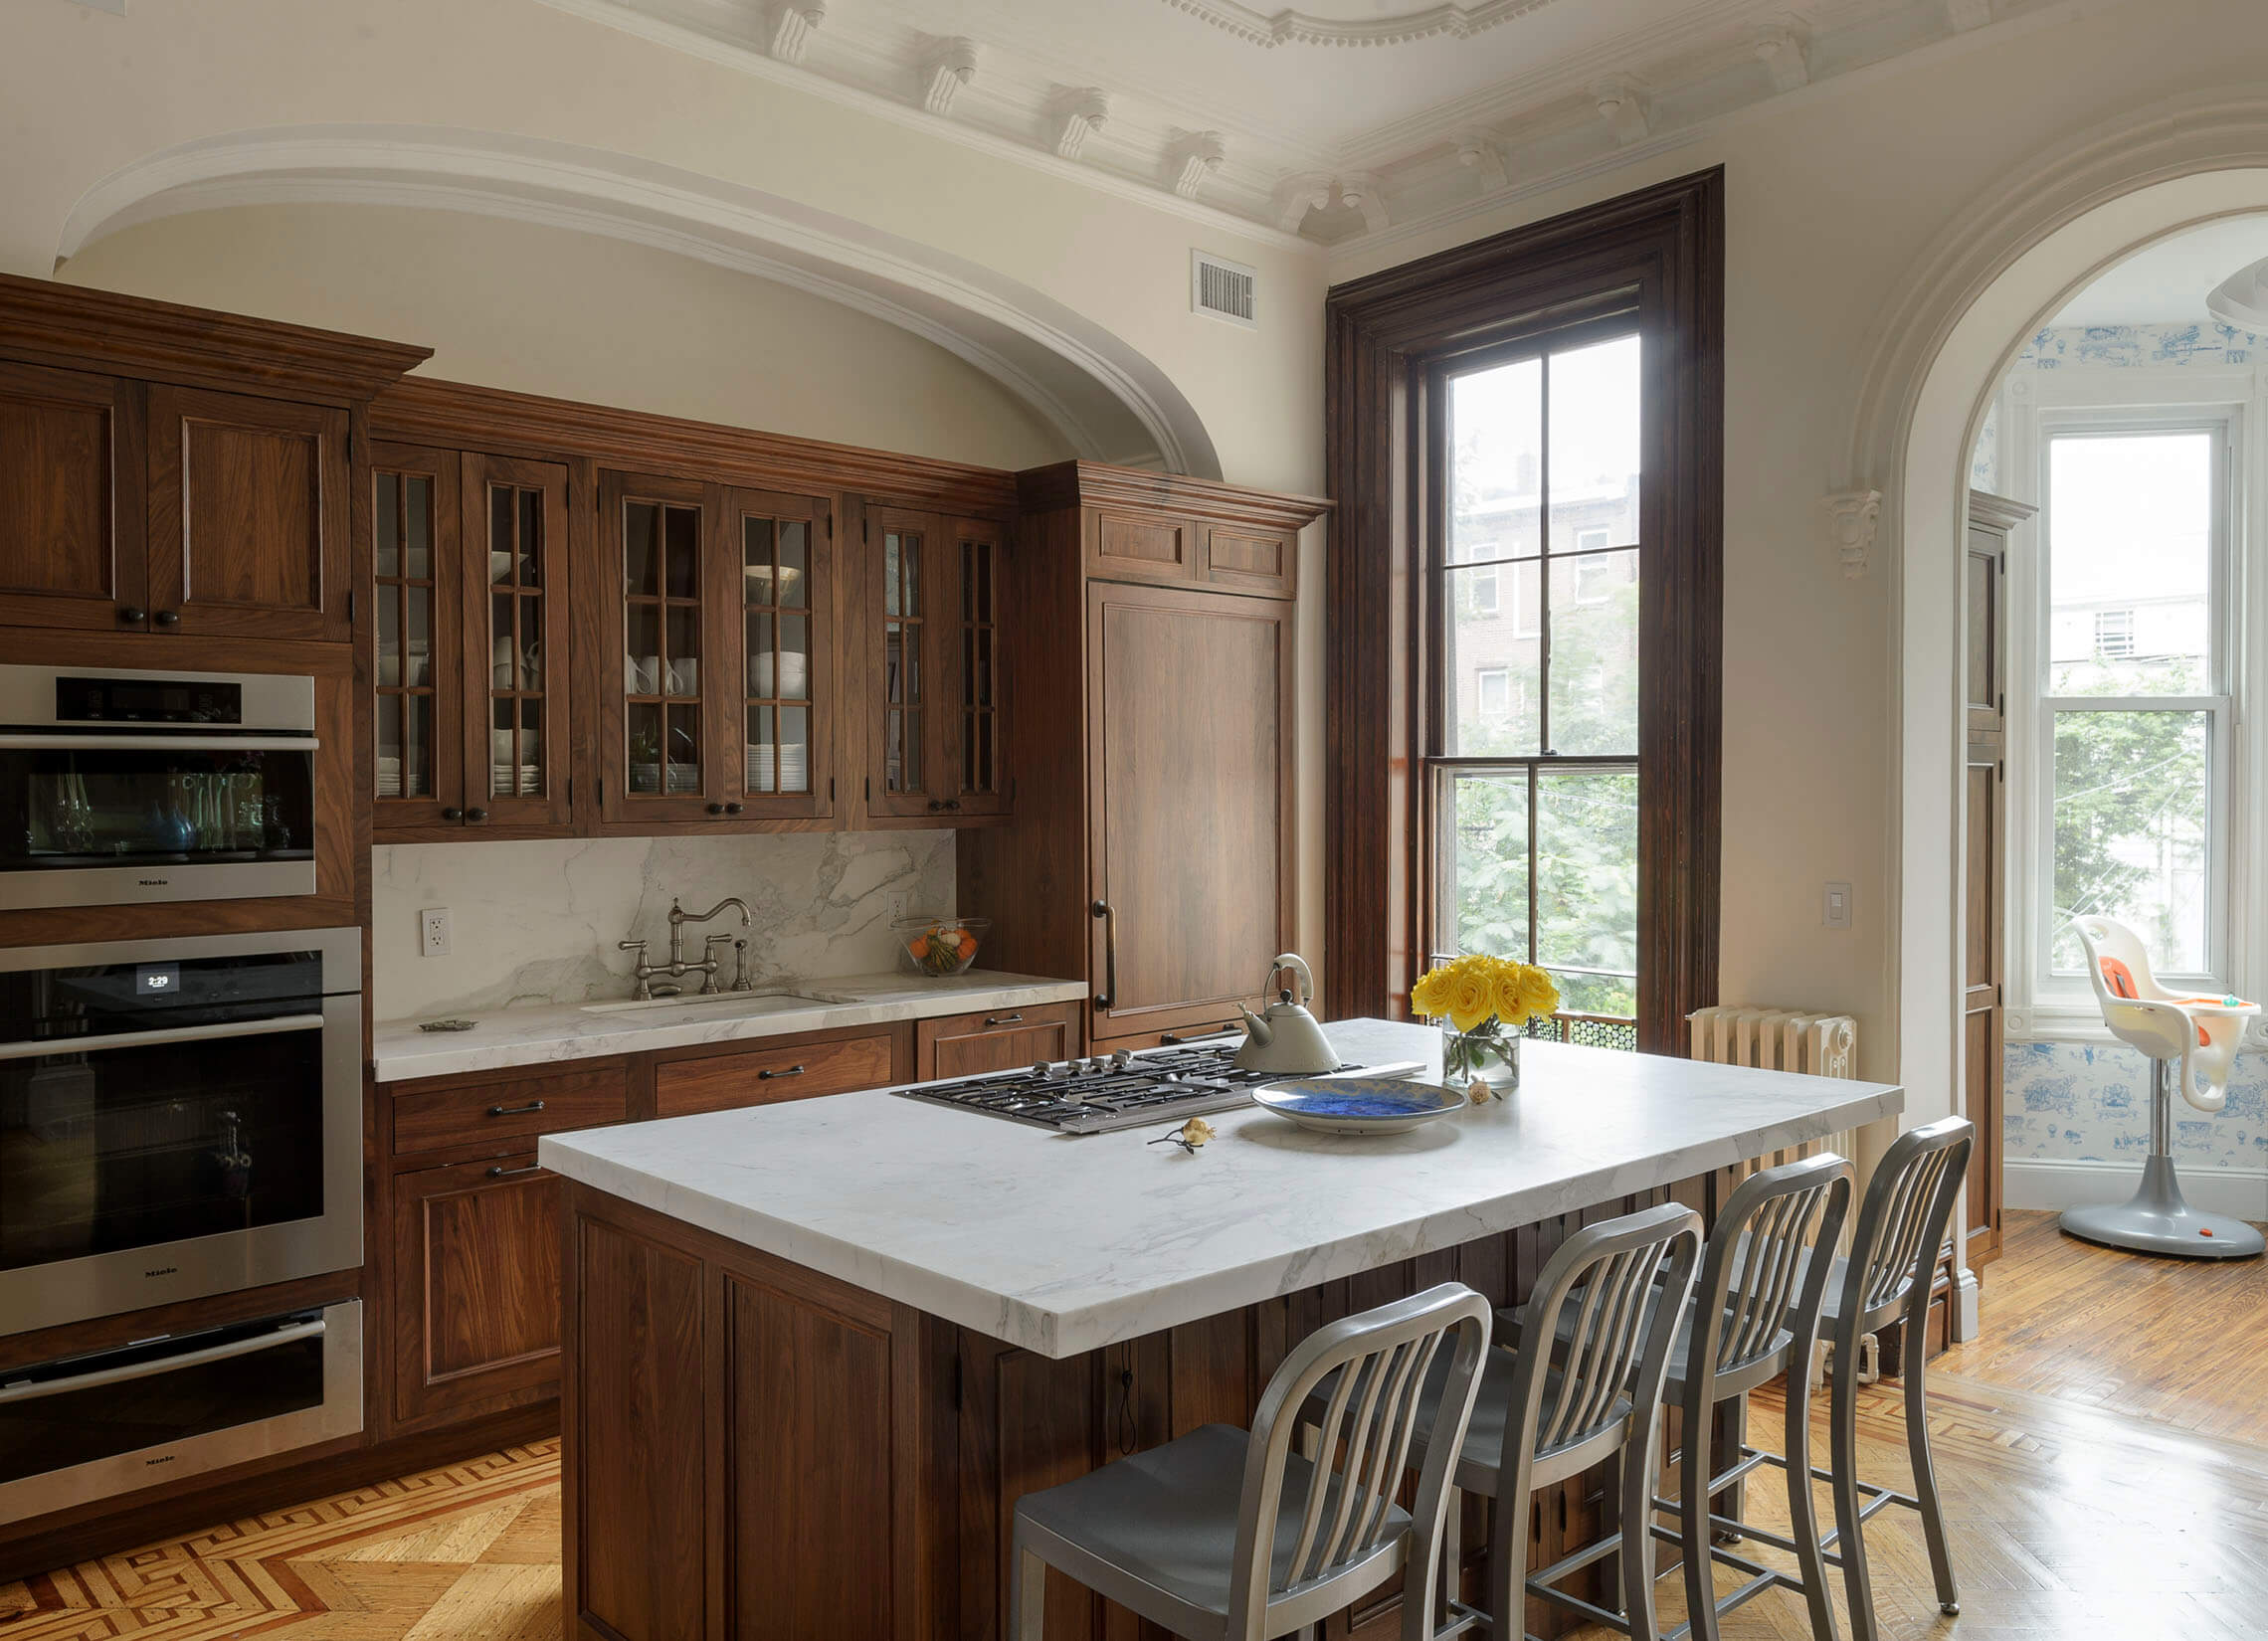 A mishap with the measuring of the kitchen island would have cost thousands to correct, so they flipped the layout of appliances to make the stone fit